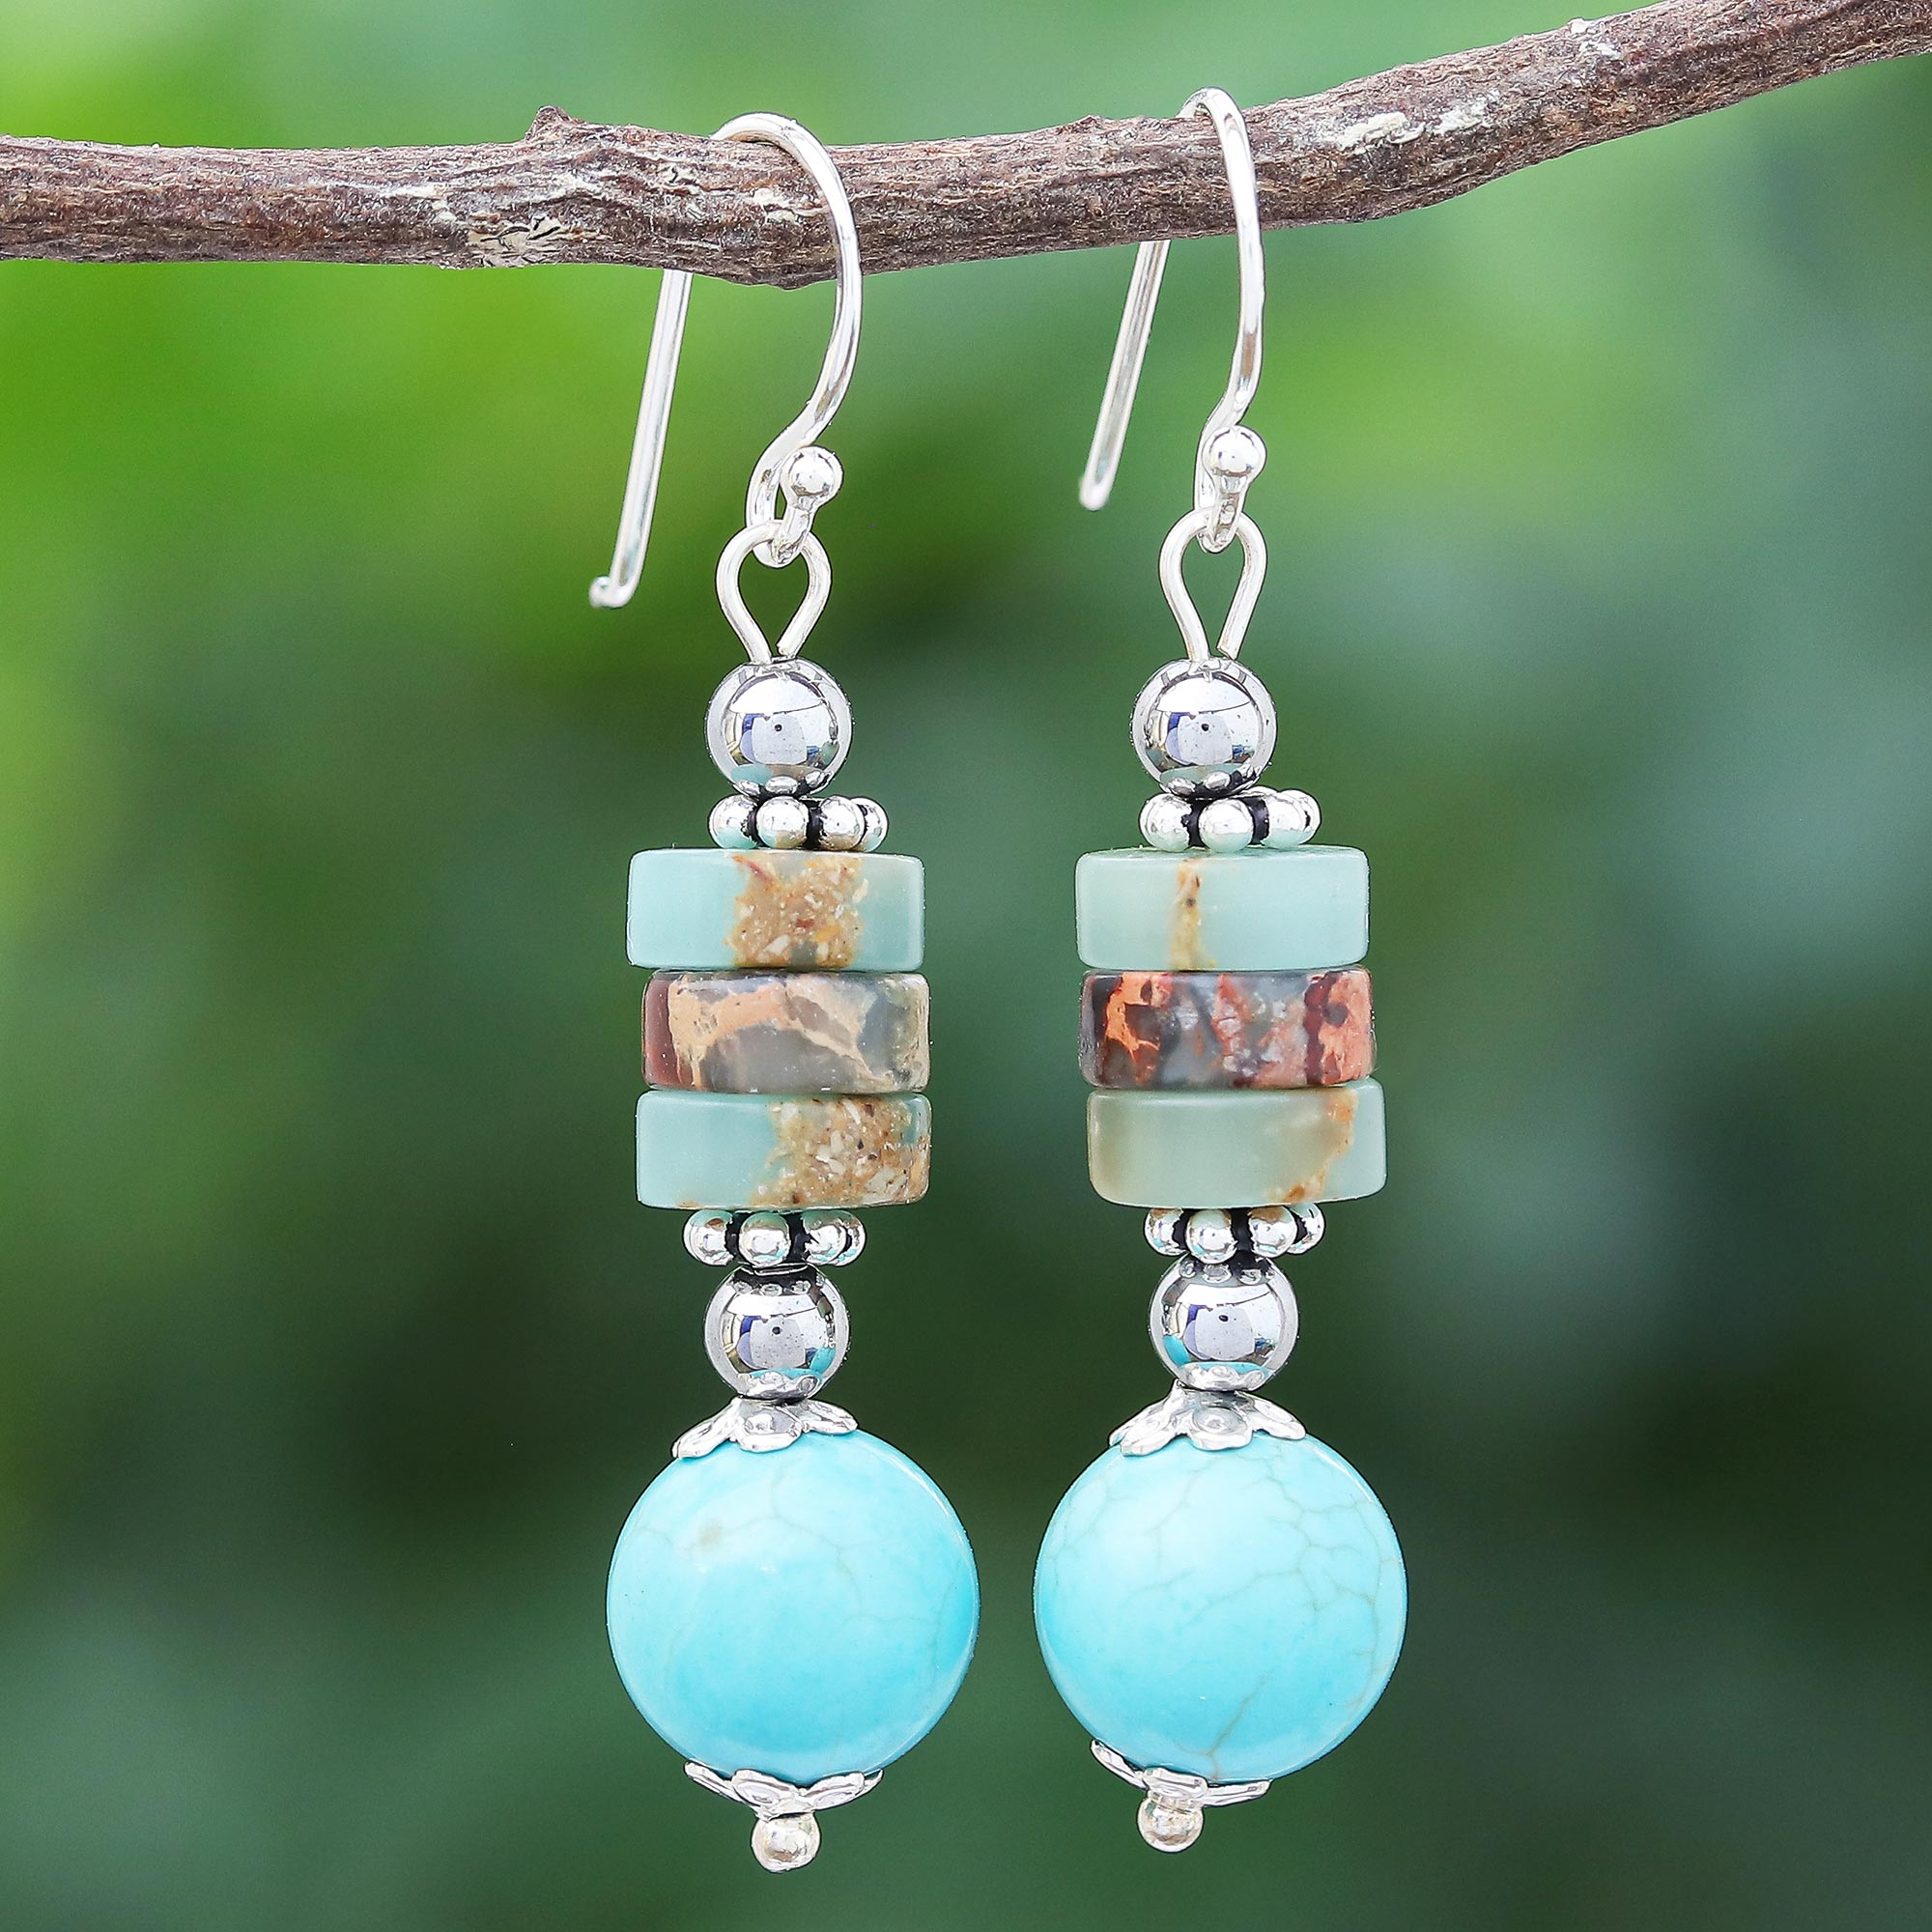 Reconstituted stone cross dangle earrings in turquoise blue or white.